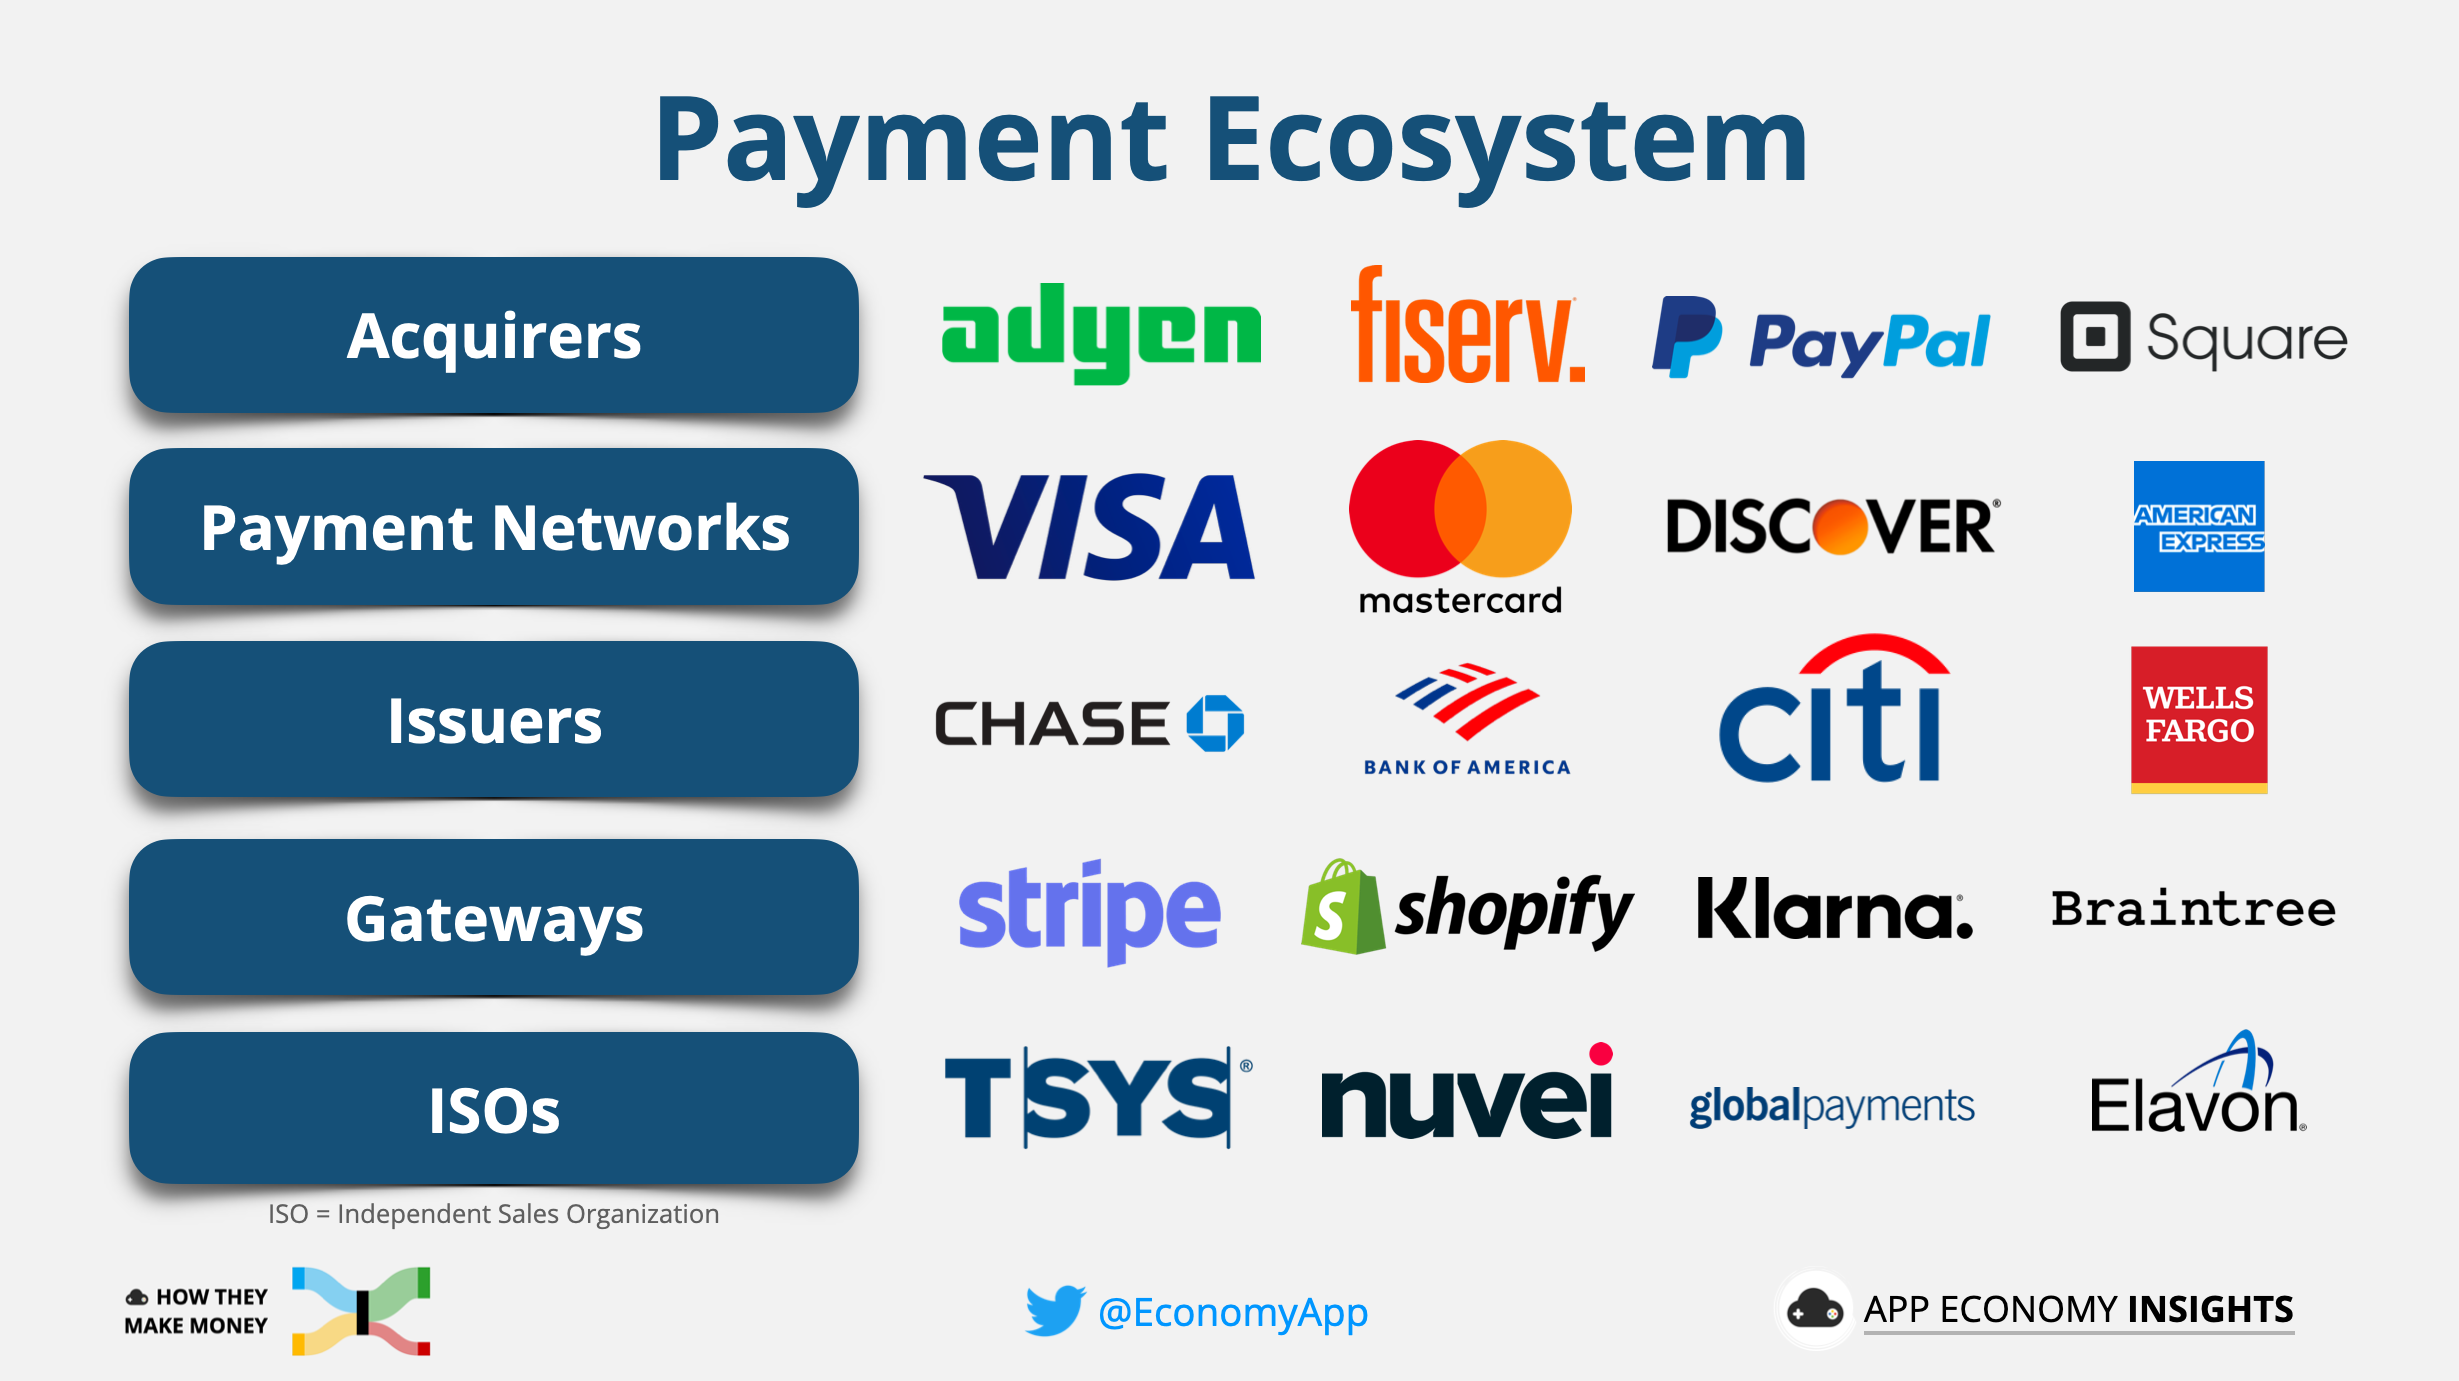  PayPal to Become Independent Companies in 2015